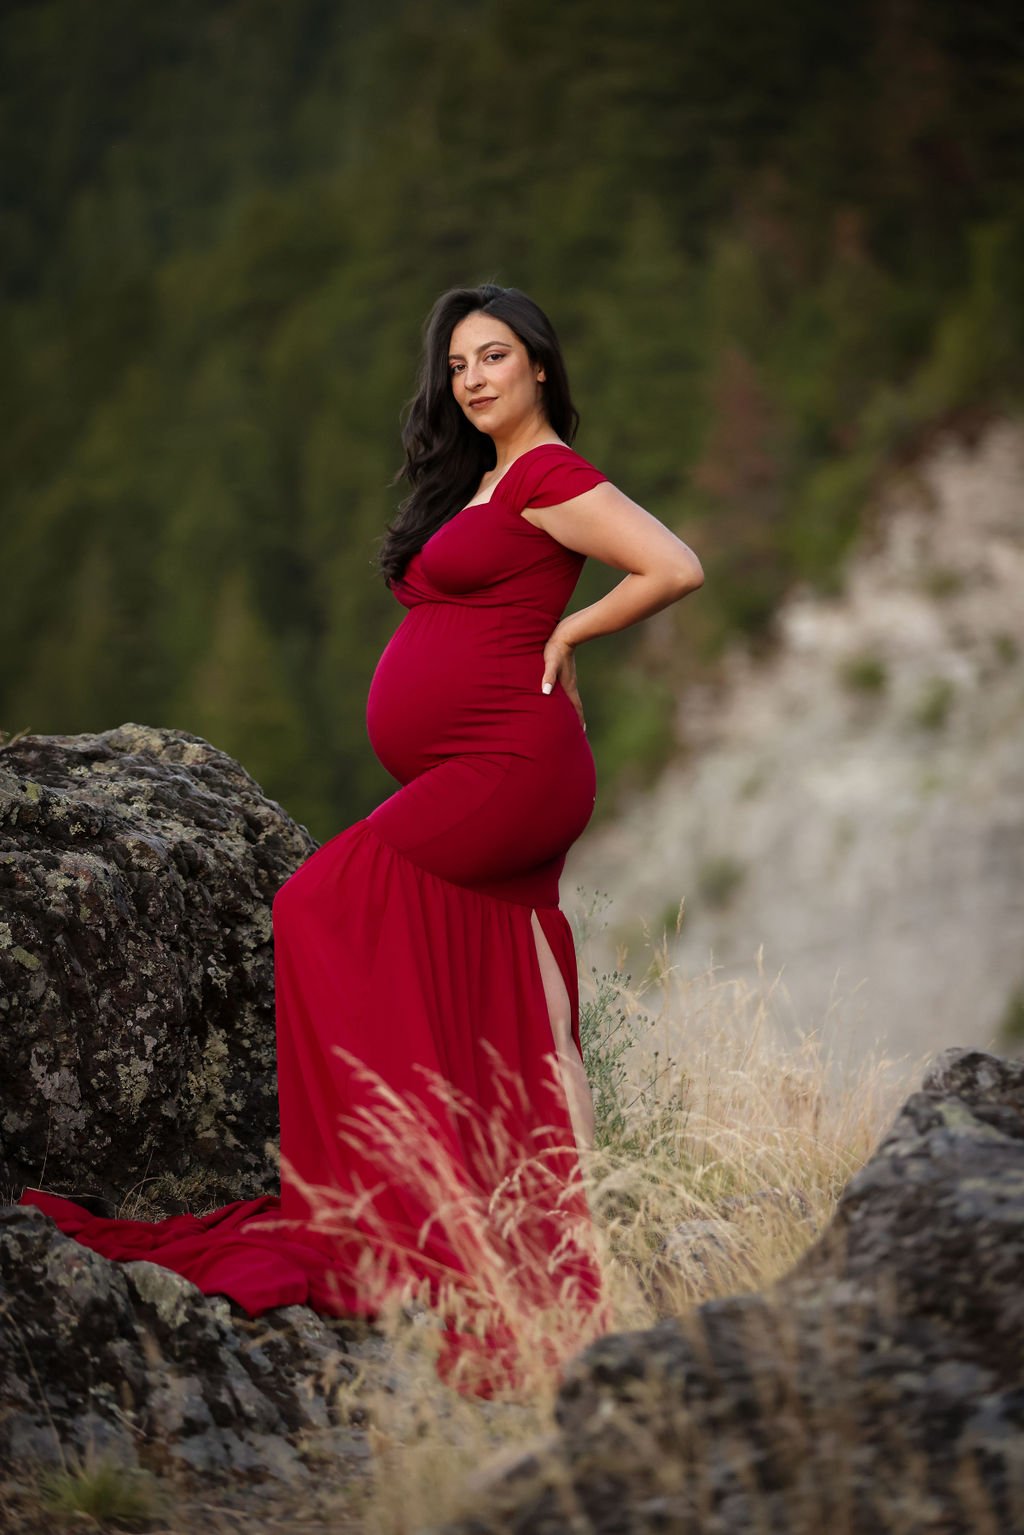 Red gown on pregnant woman.jpg